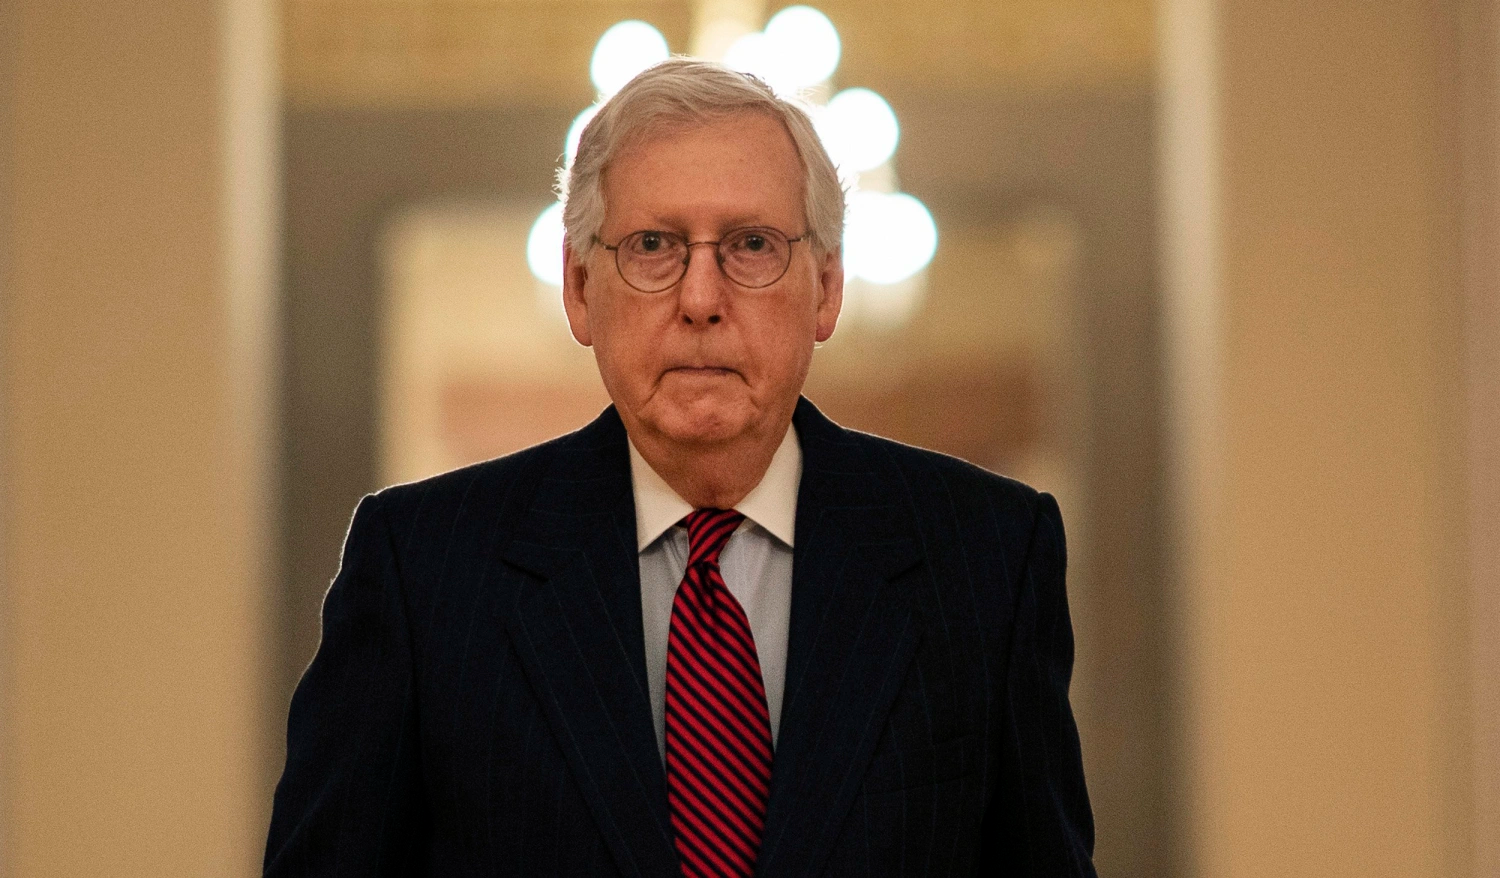 Mitch McConnell Biography